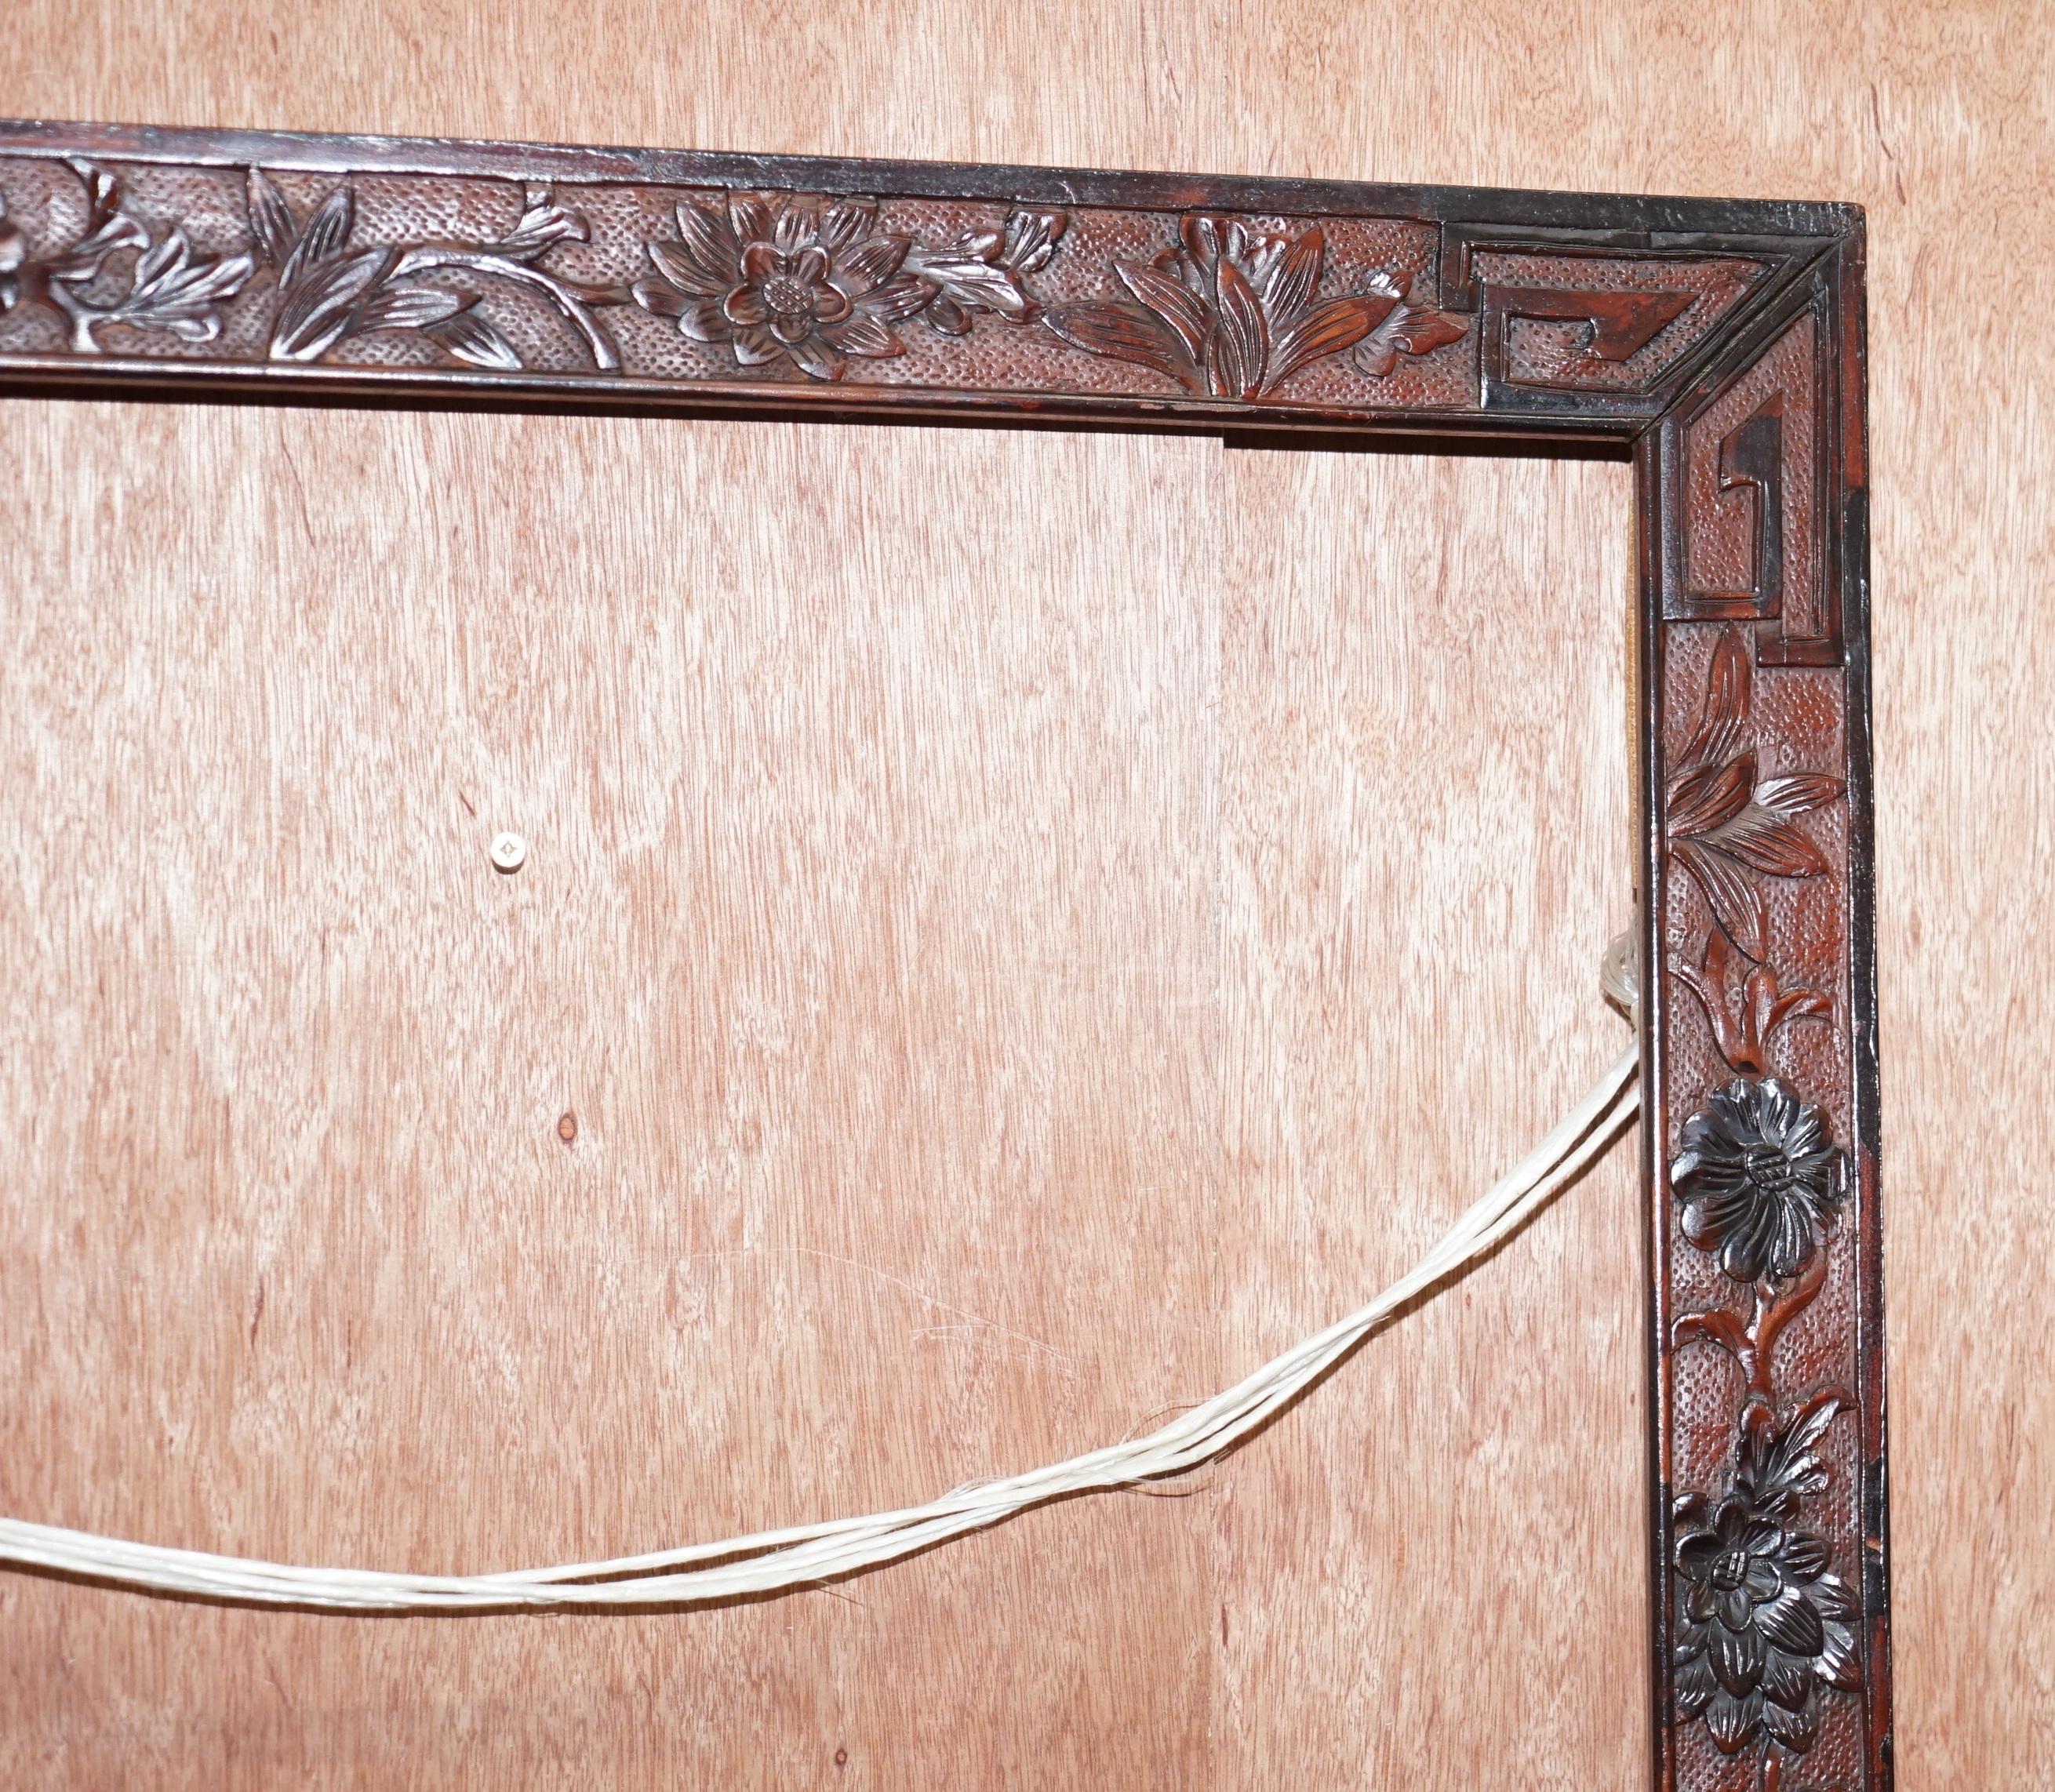 Pair of Chinese Export circa 1920 Hardwood Mirror or Picture Frames Floral Decor 8